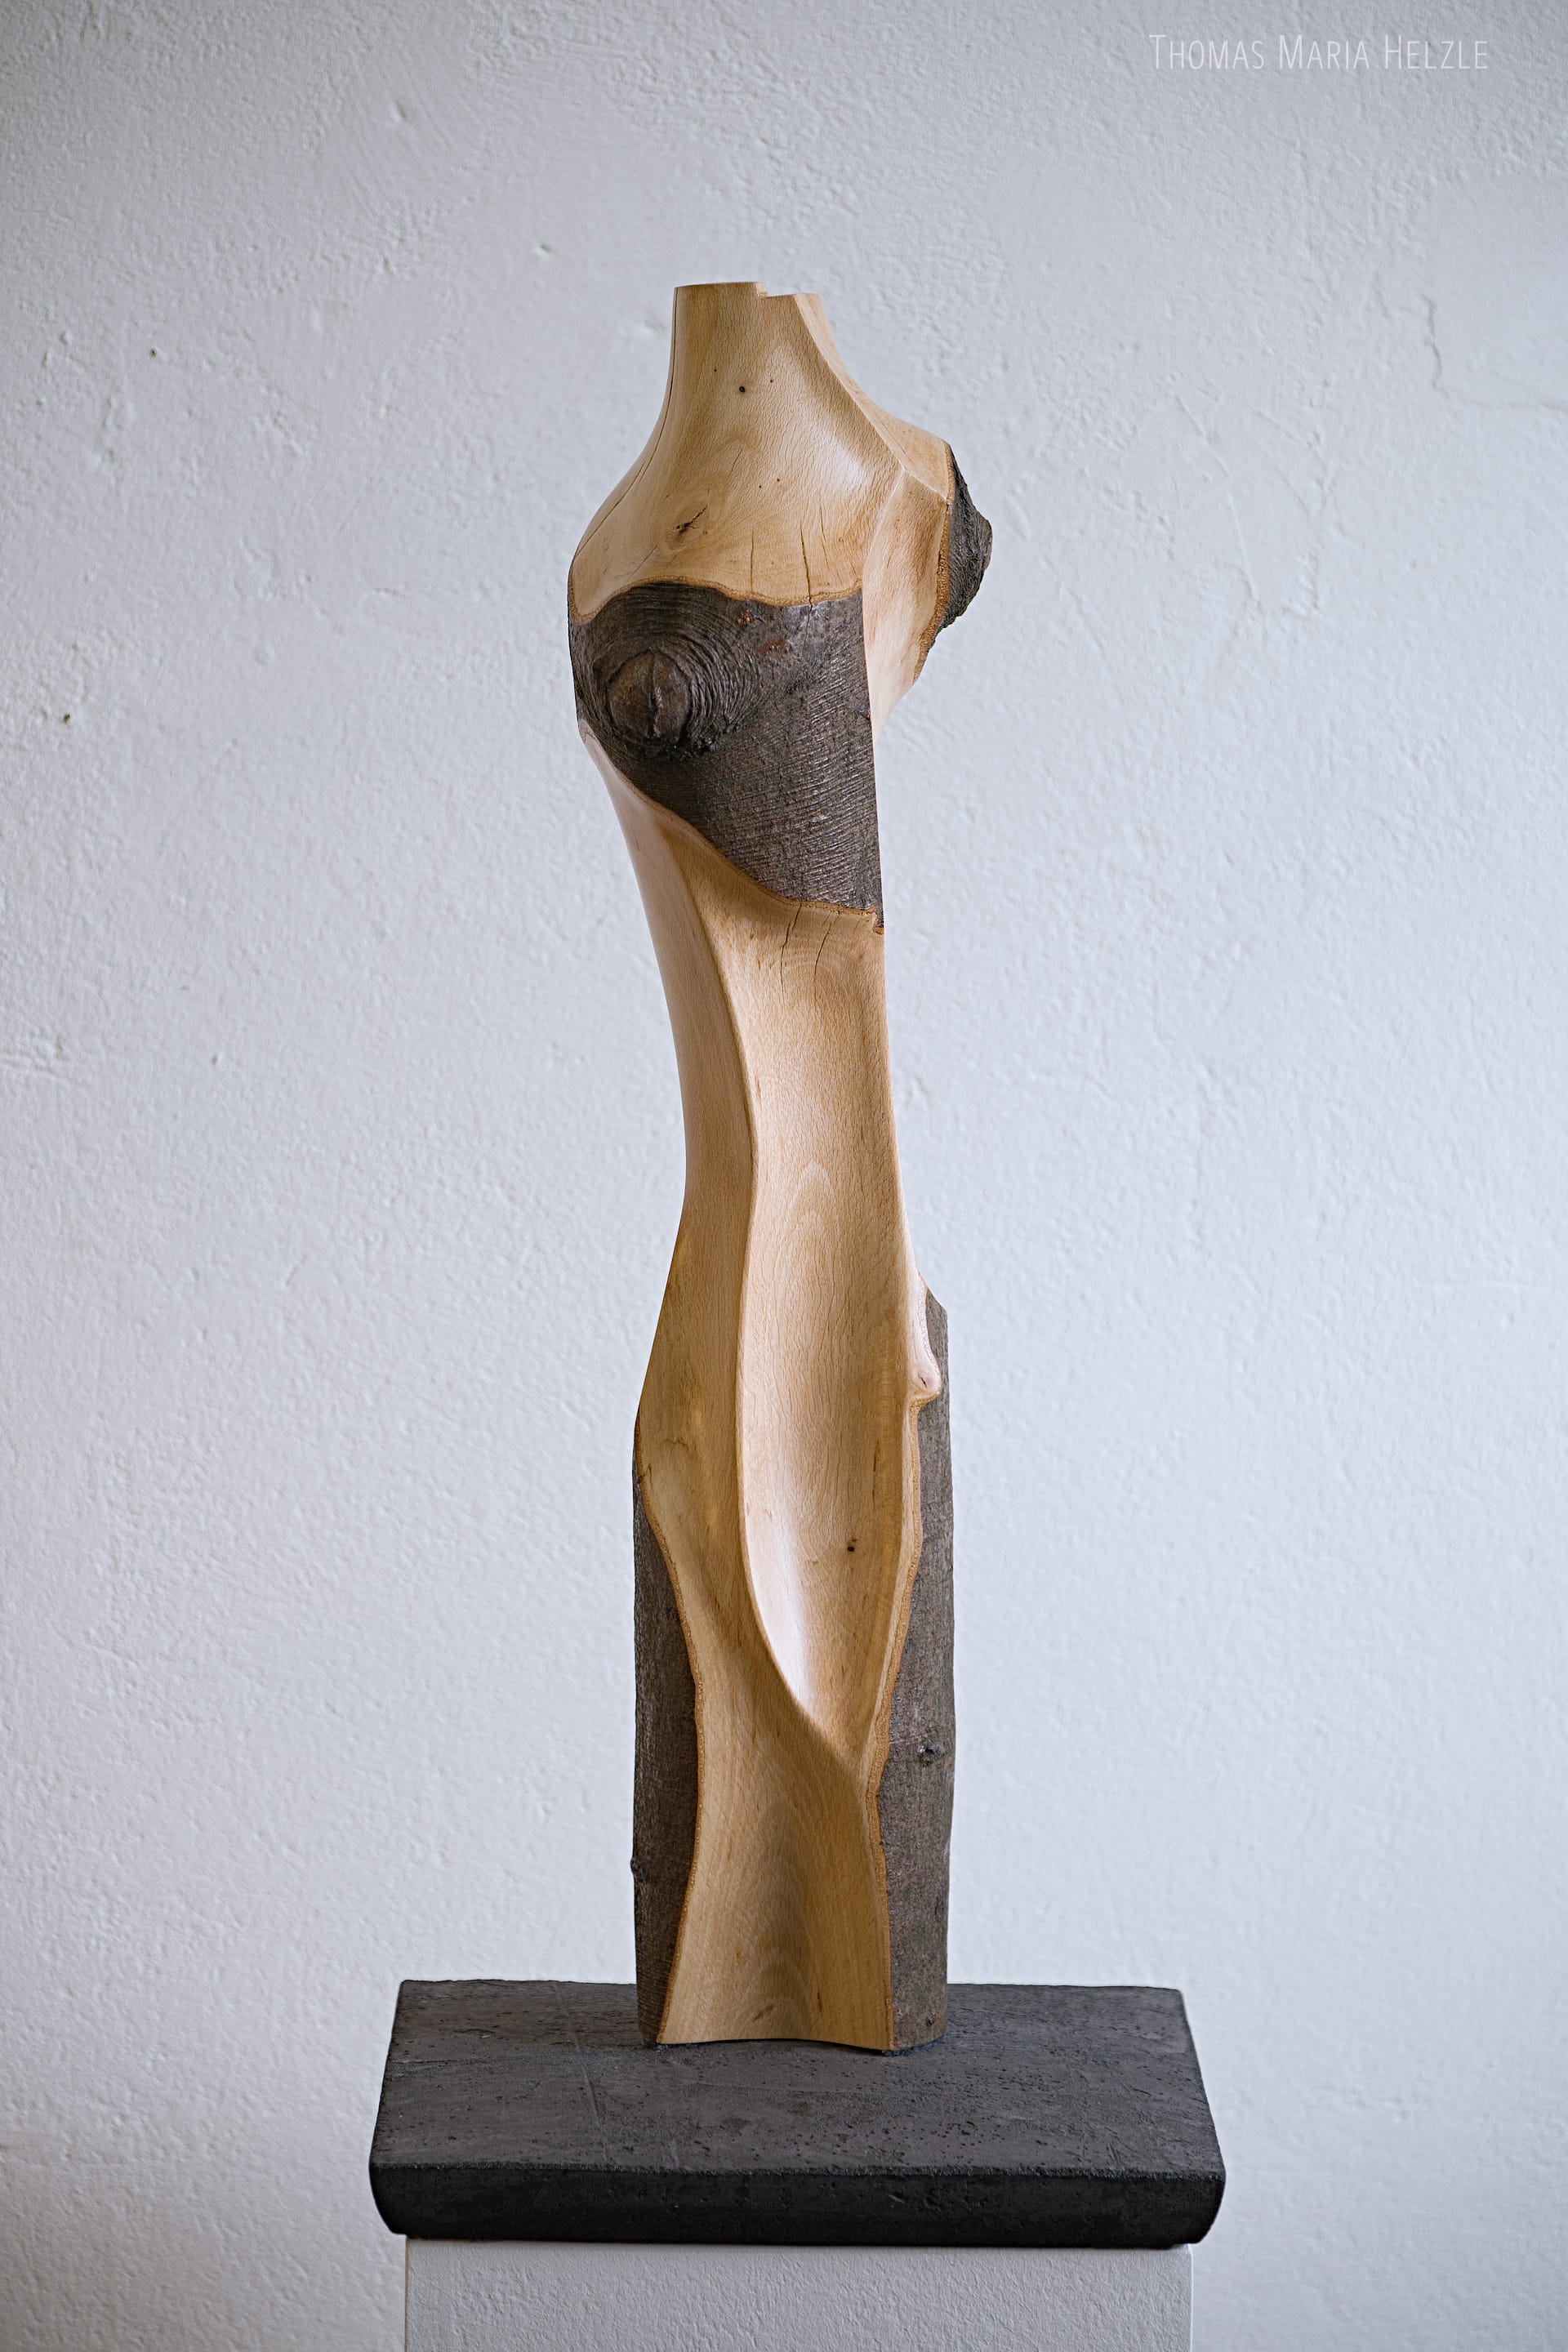 Frontal view of the Torso sculpture, showing areas with the bark still in place and organic flowing carved forms otherwise, contrasted by sharp edges and the outlines of the bark. The texture of the beech wood is beautifully visible and the surface finish is semi-glossy with hard oil.